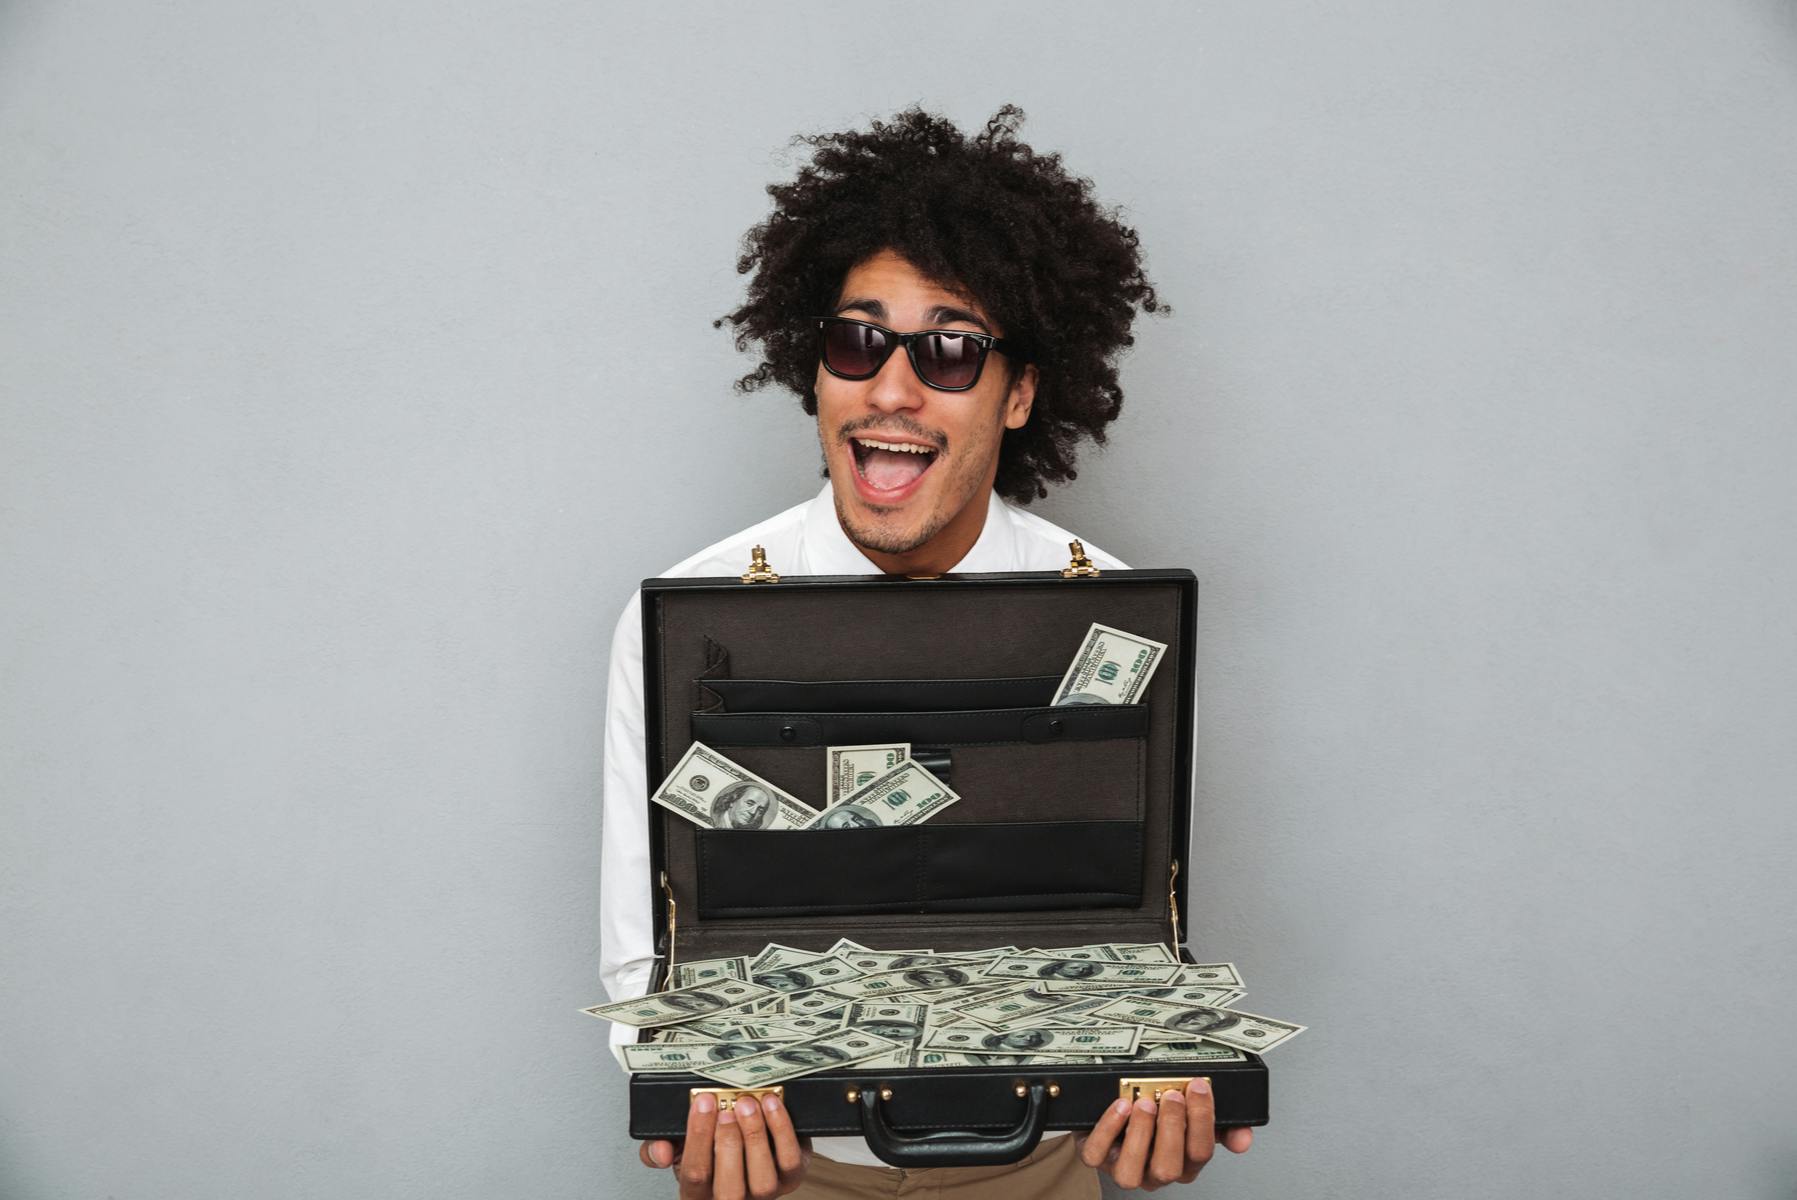 Man holding an open suitcase full of money